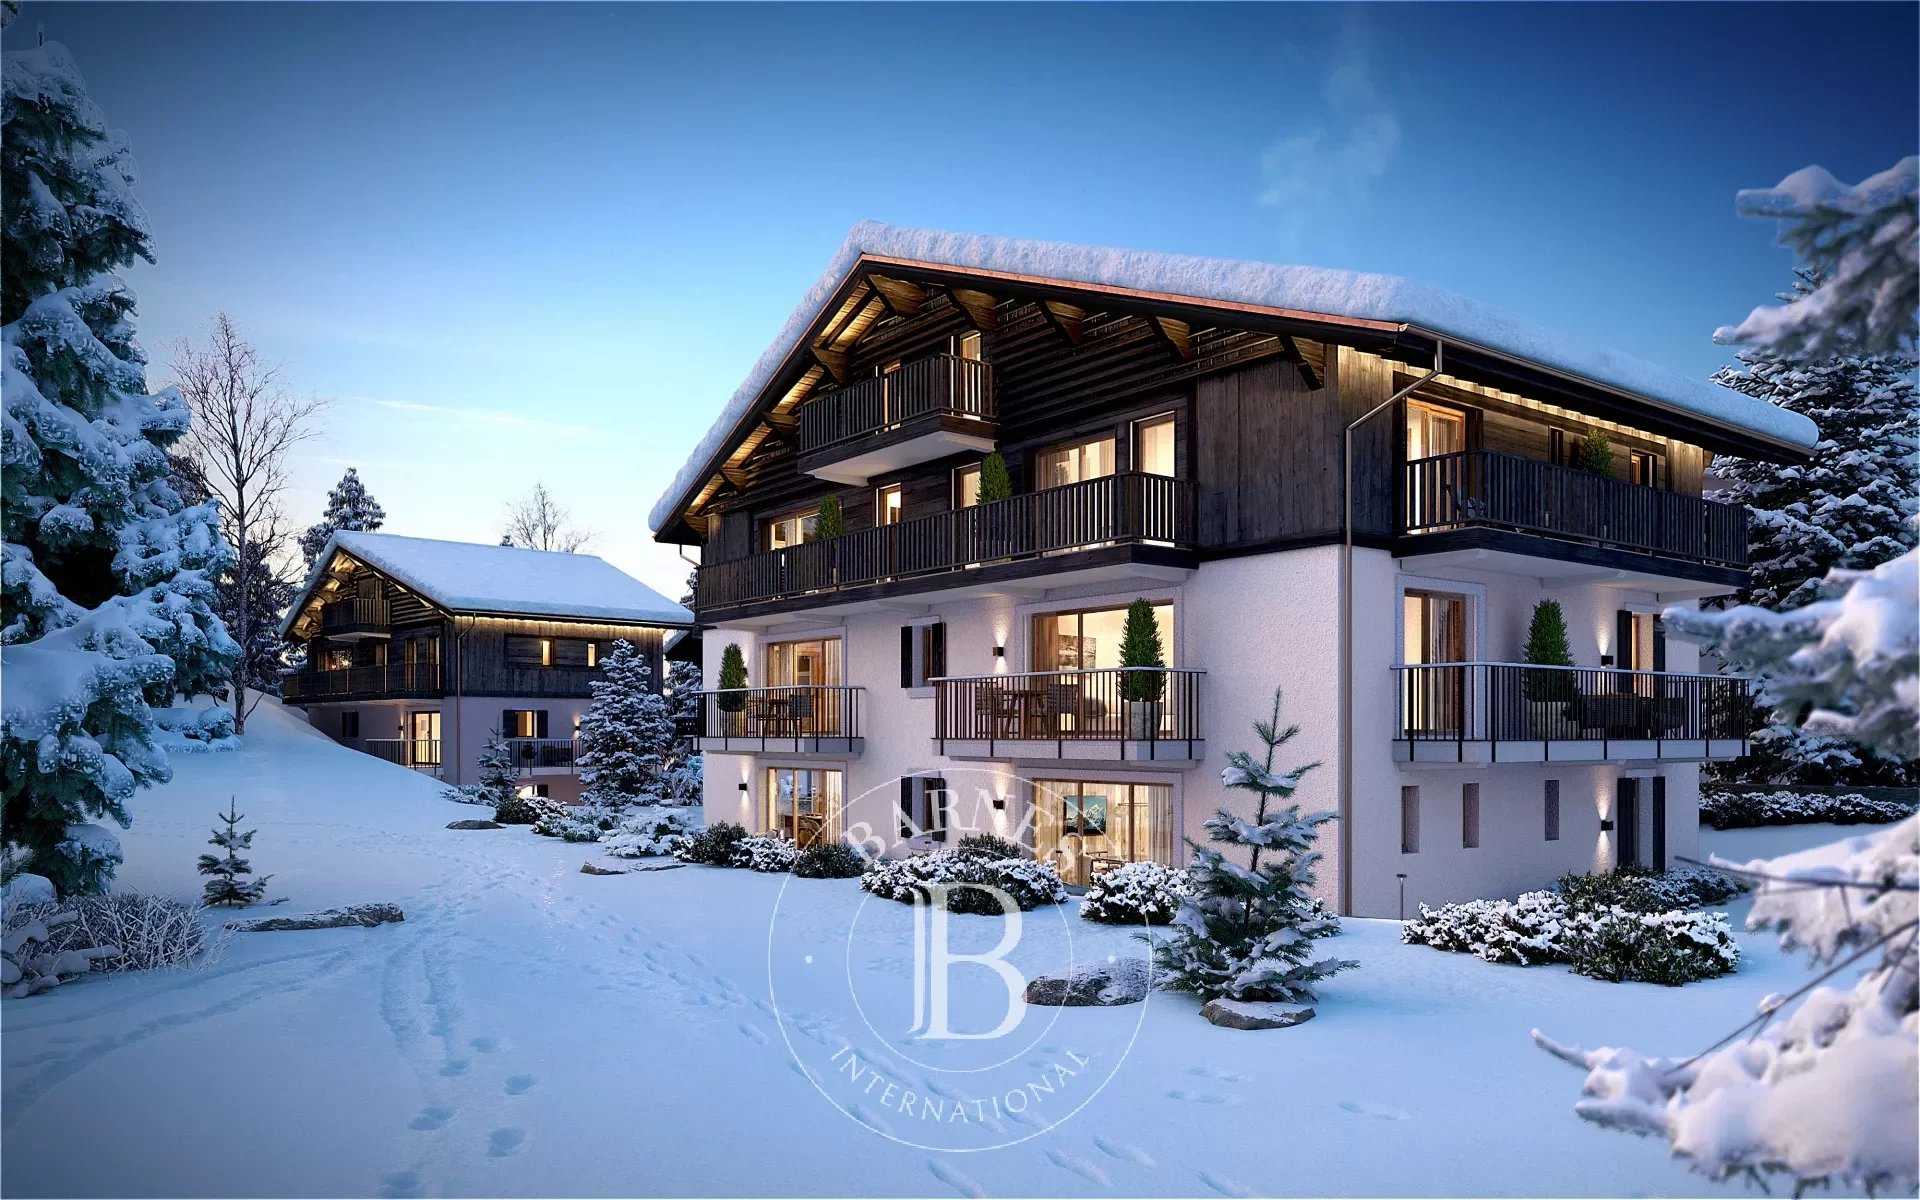 9 LUXURY APARTMENTS IN THE CENTER OF MEGEVE VILLAGE Megève